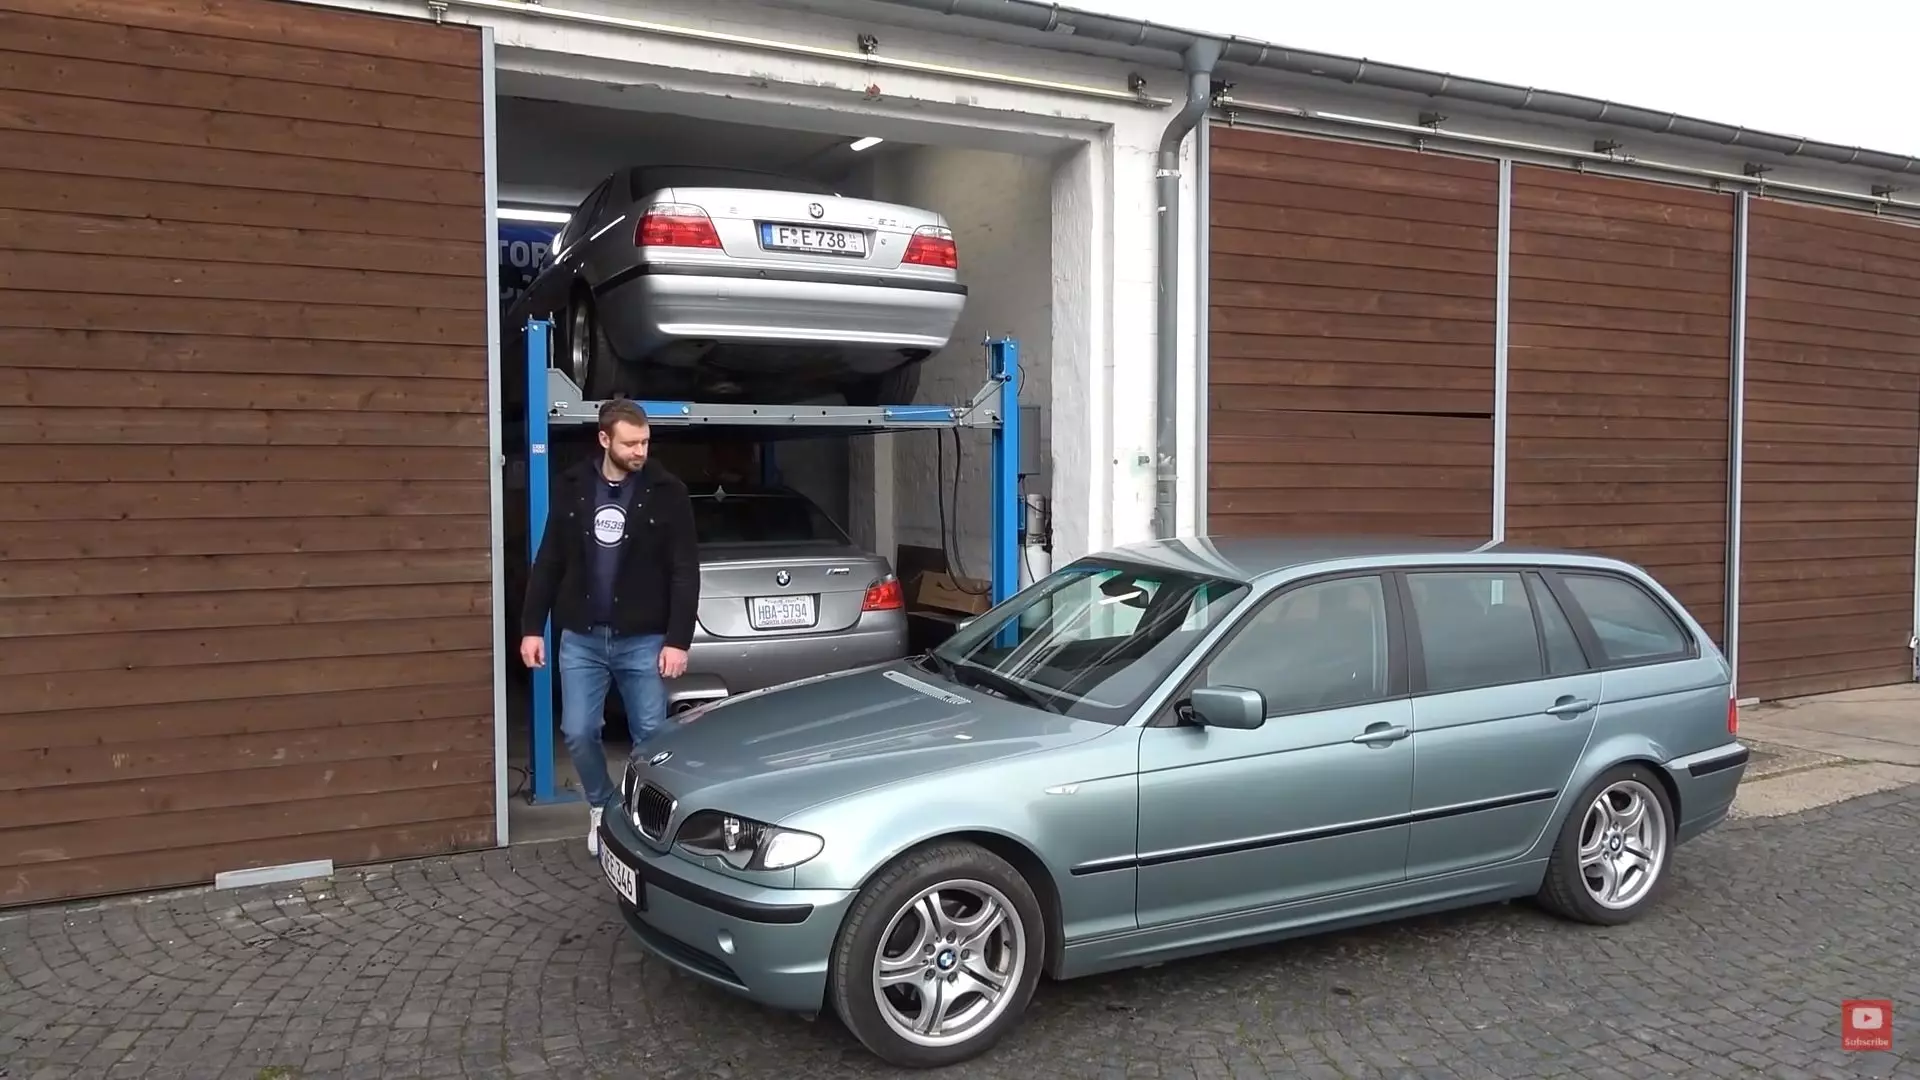 The M539 Restorations YouTube Channel Is Essential Viewing For &#8217;90s And 2000s BMW Fans | Autance